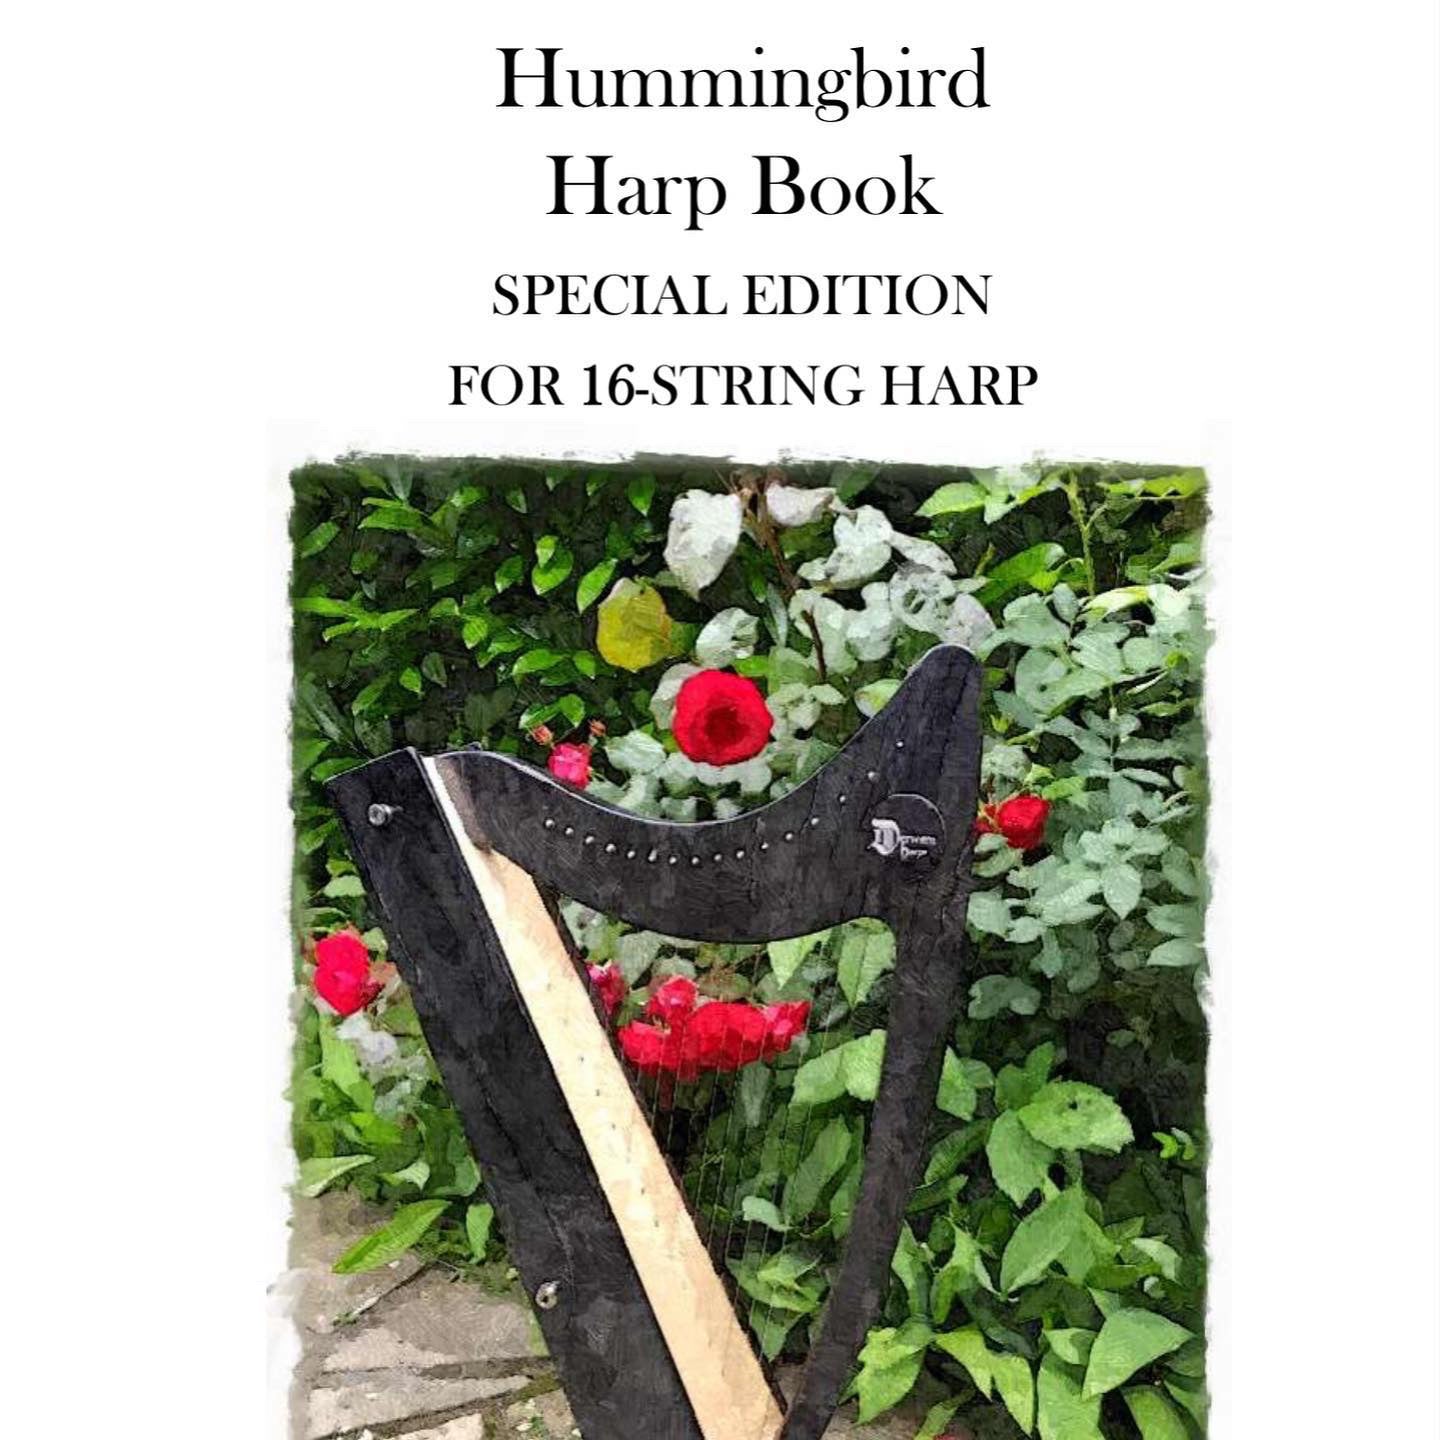 Special Edition Hummingbird Harp Book for the Discovery 16 by Kristine Warmhold